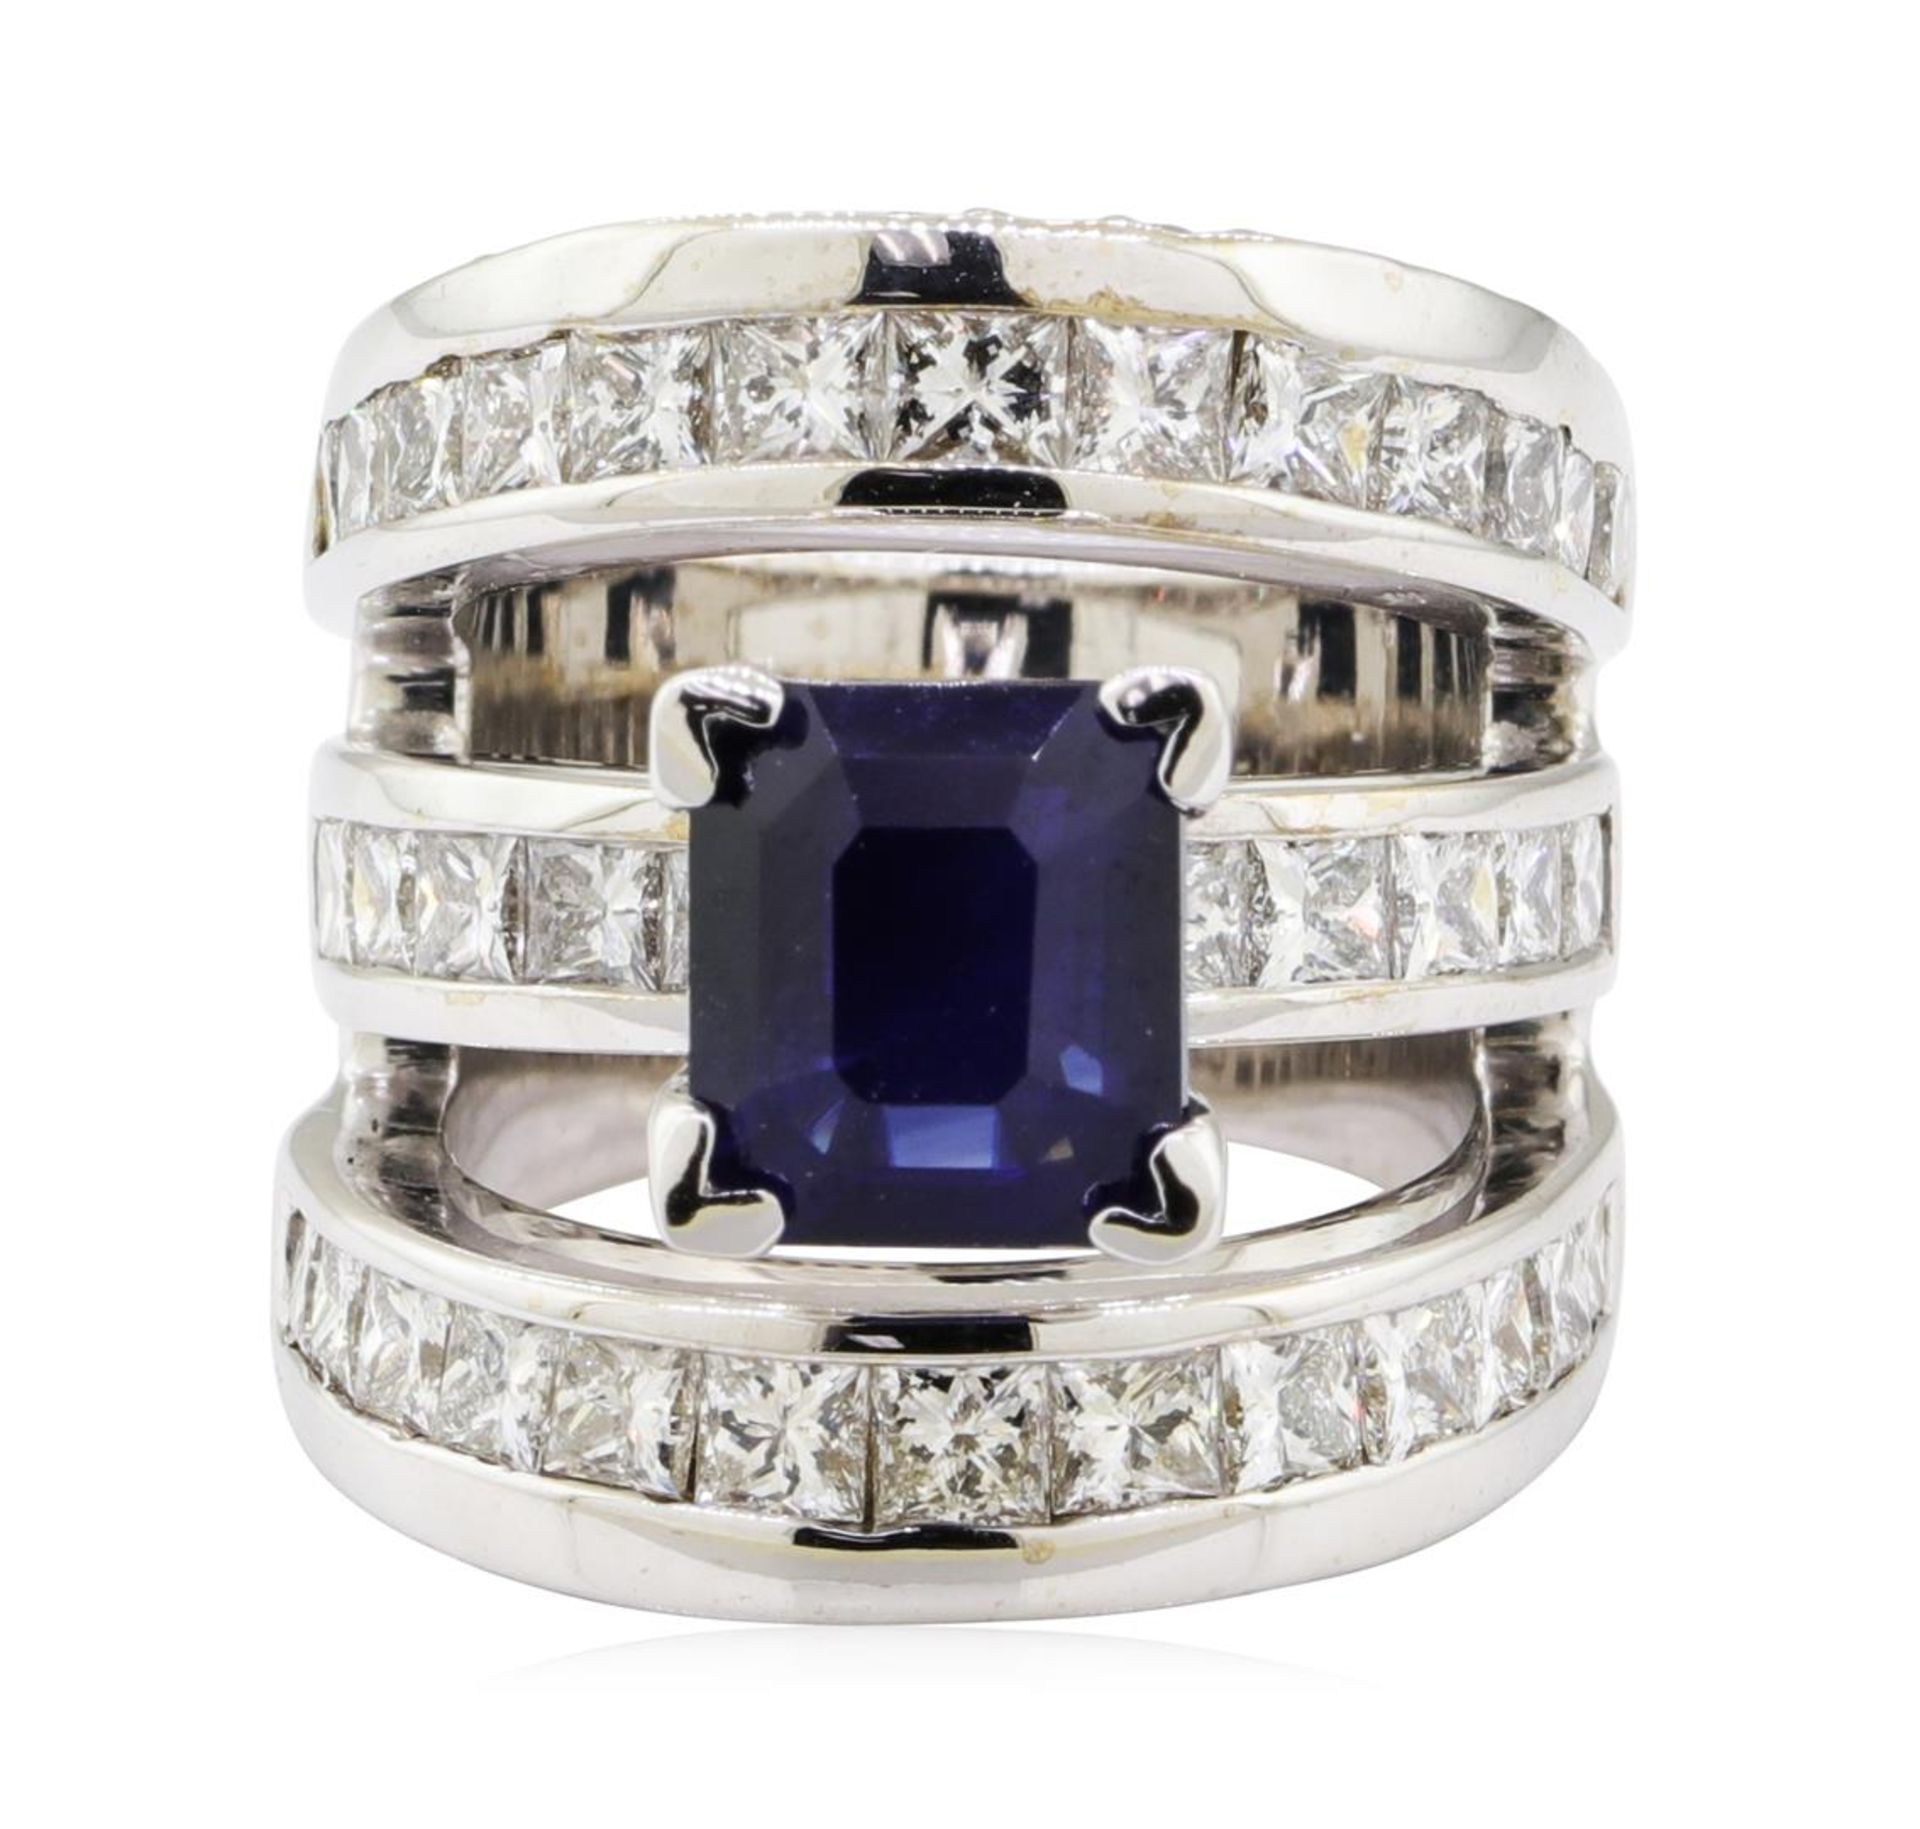 7.40 ctw Sapphire and Diamond Ring - 18KT White Gold - Image 2 of 5